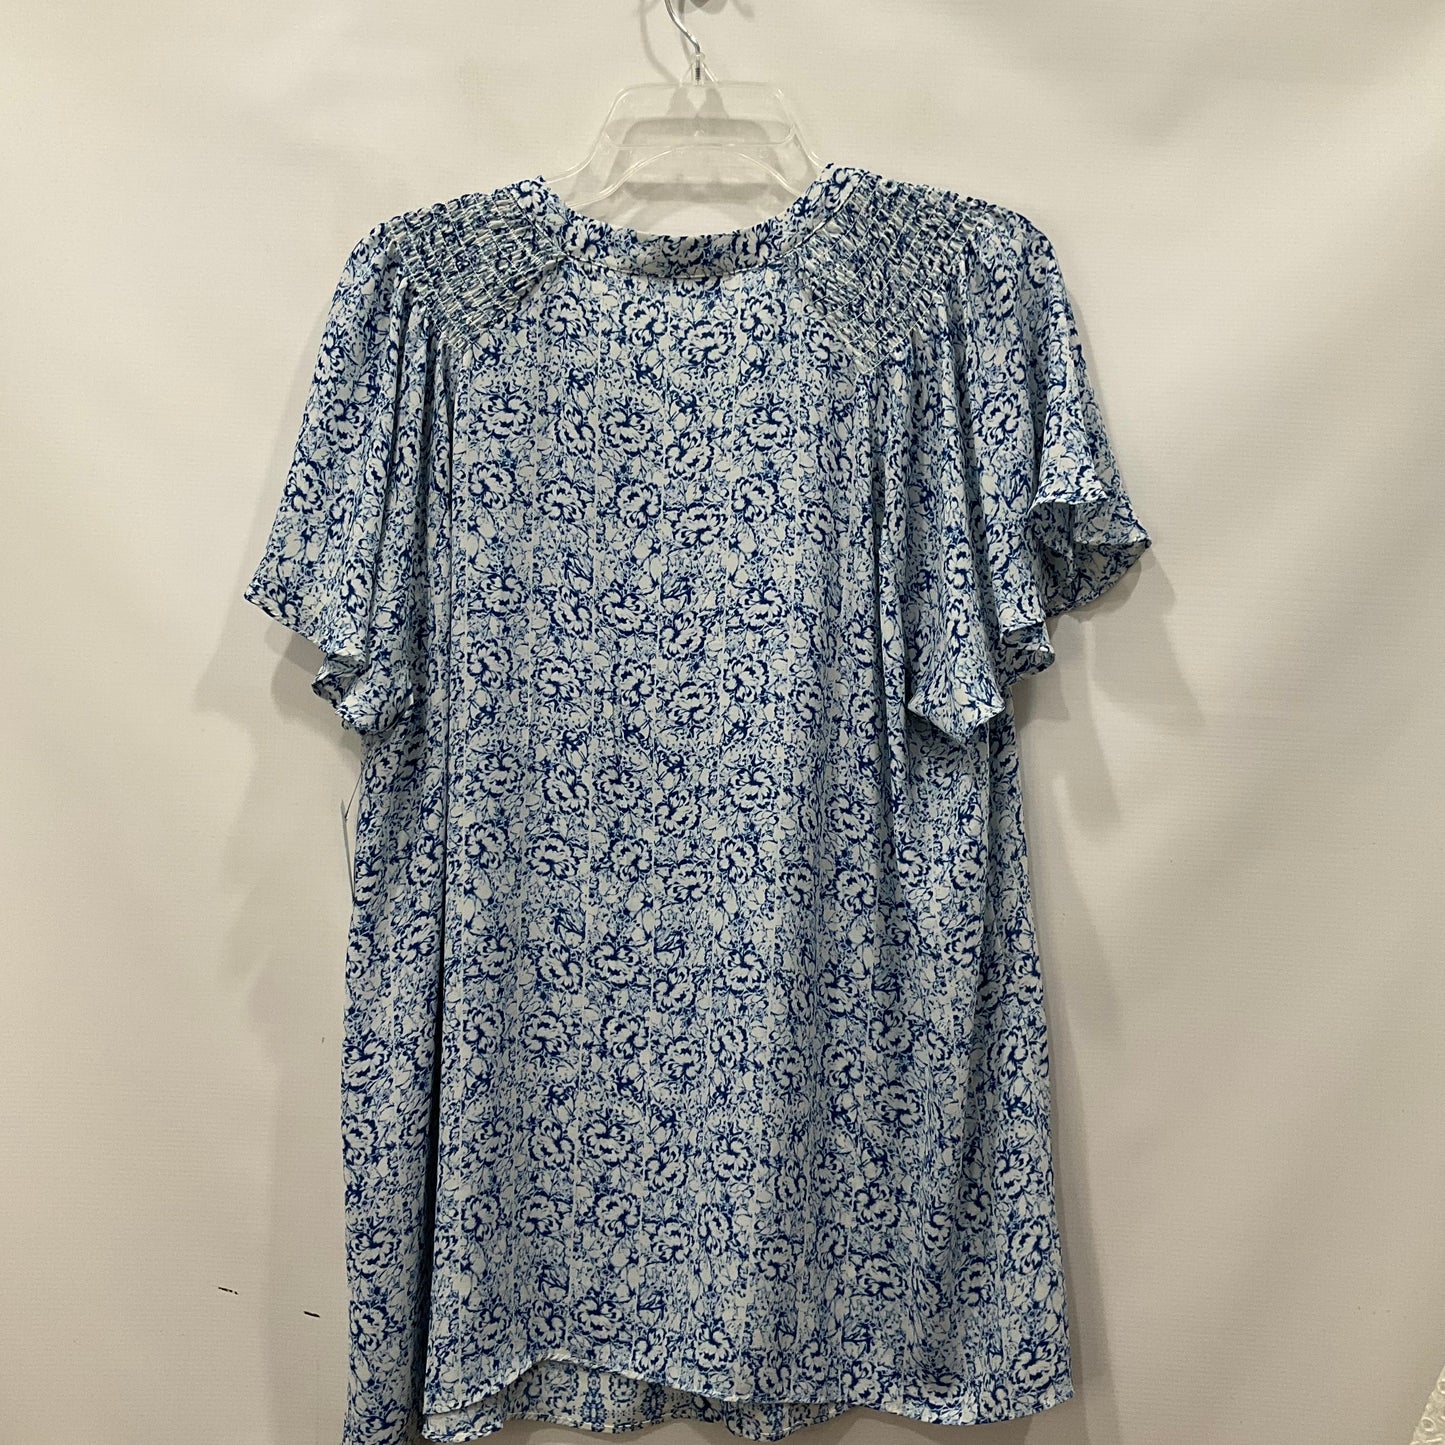 Blue & White Top Short Sleeve Rose And Olive, Size 2x